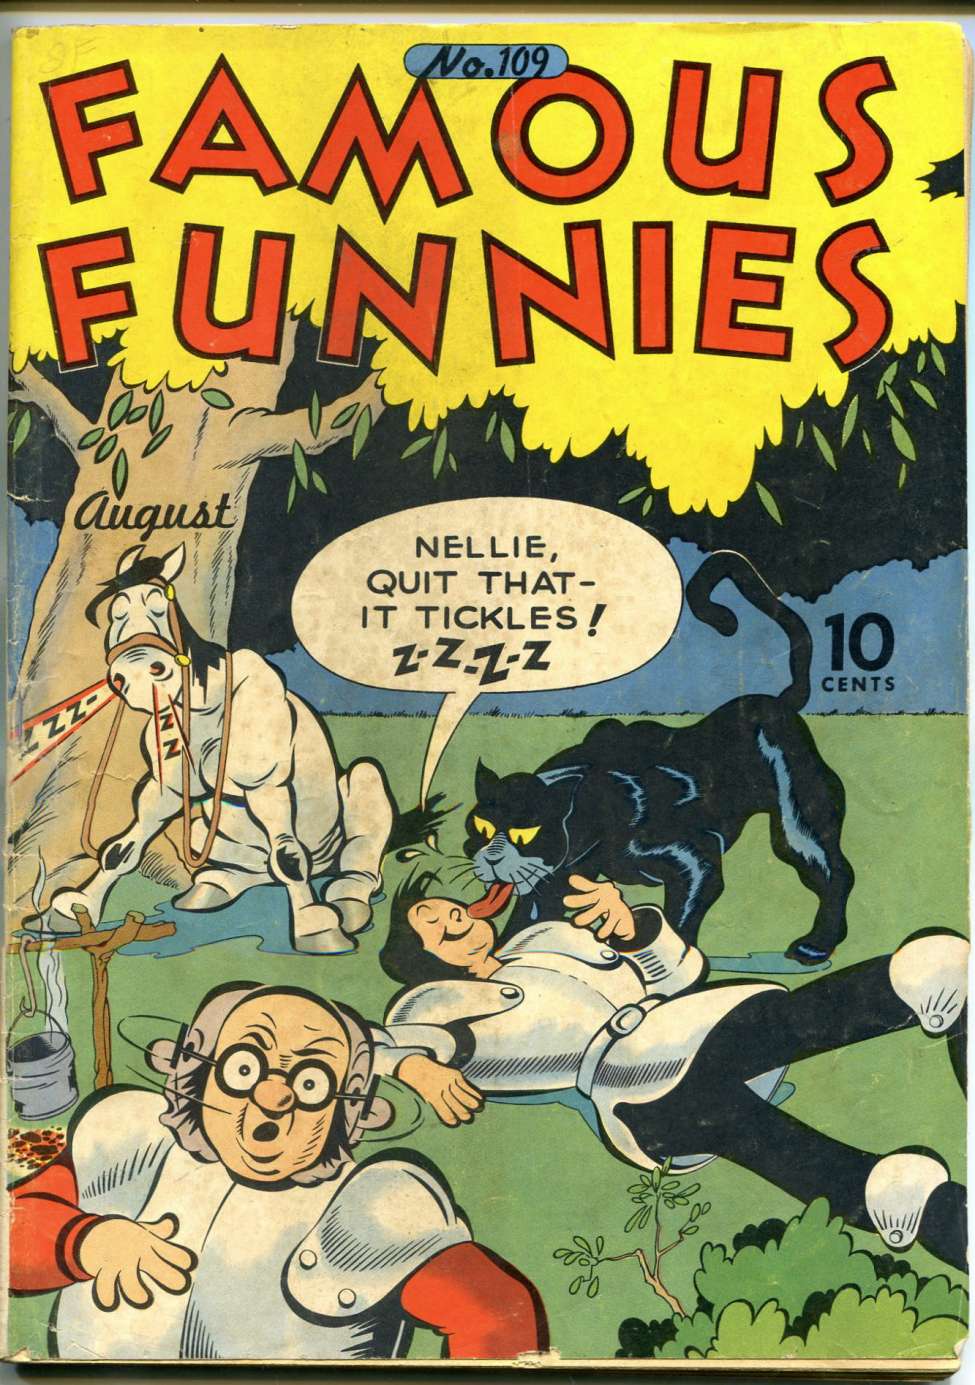 Book Cover For Famous Funnies 109